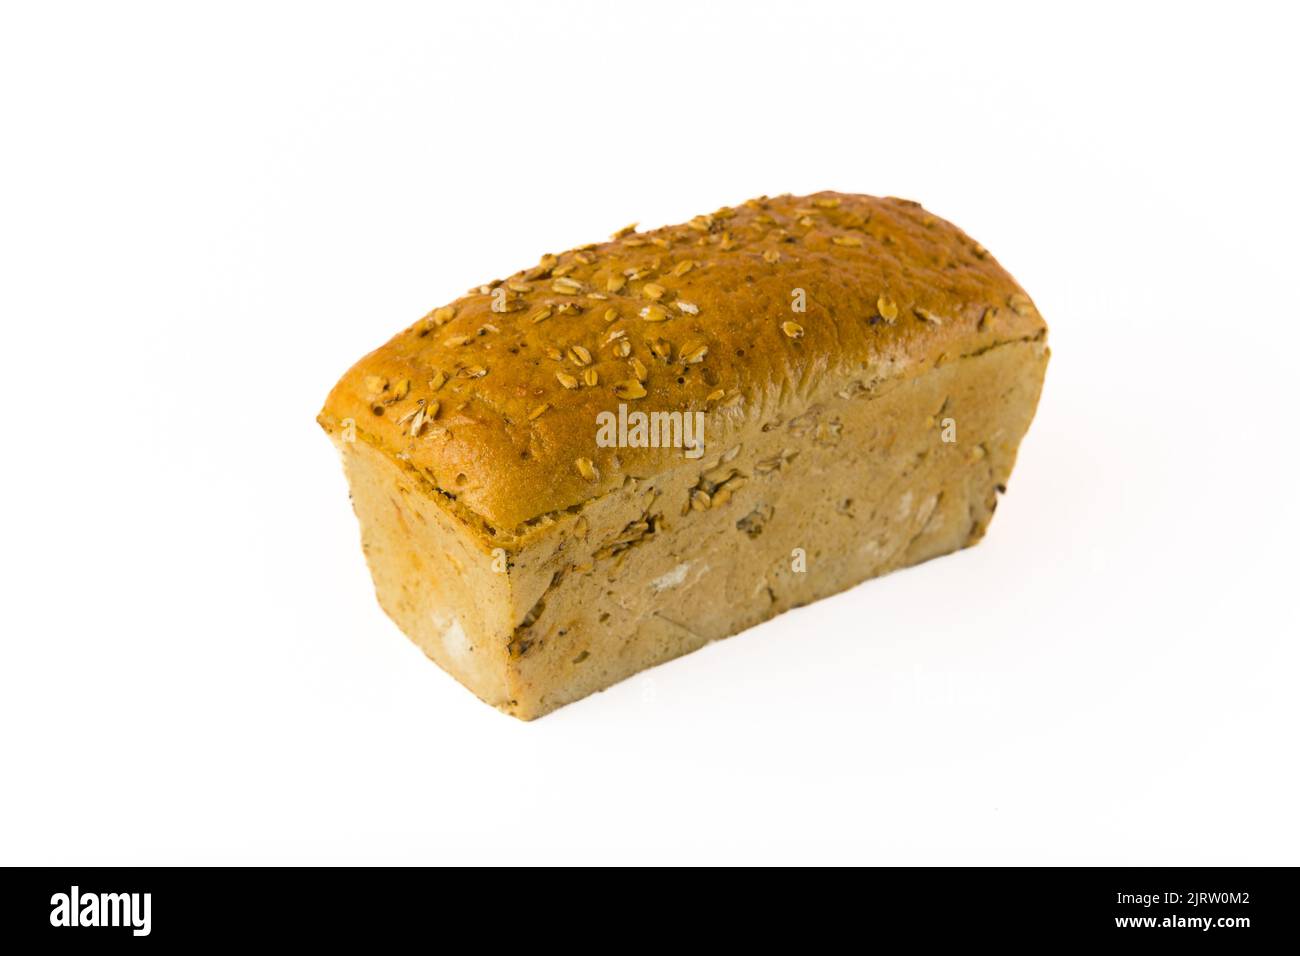 Bakery concept. New product baked by a professional baker. Whole wheat loaf of bread with oats isolated on white background. High quality photo Stock Photo